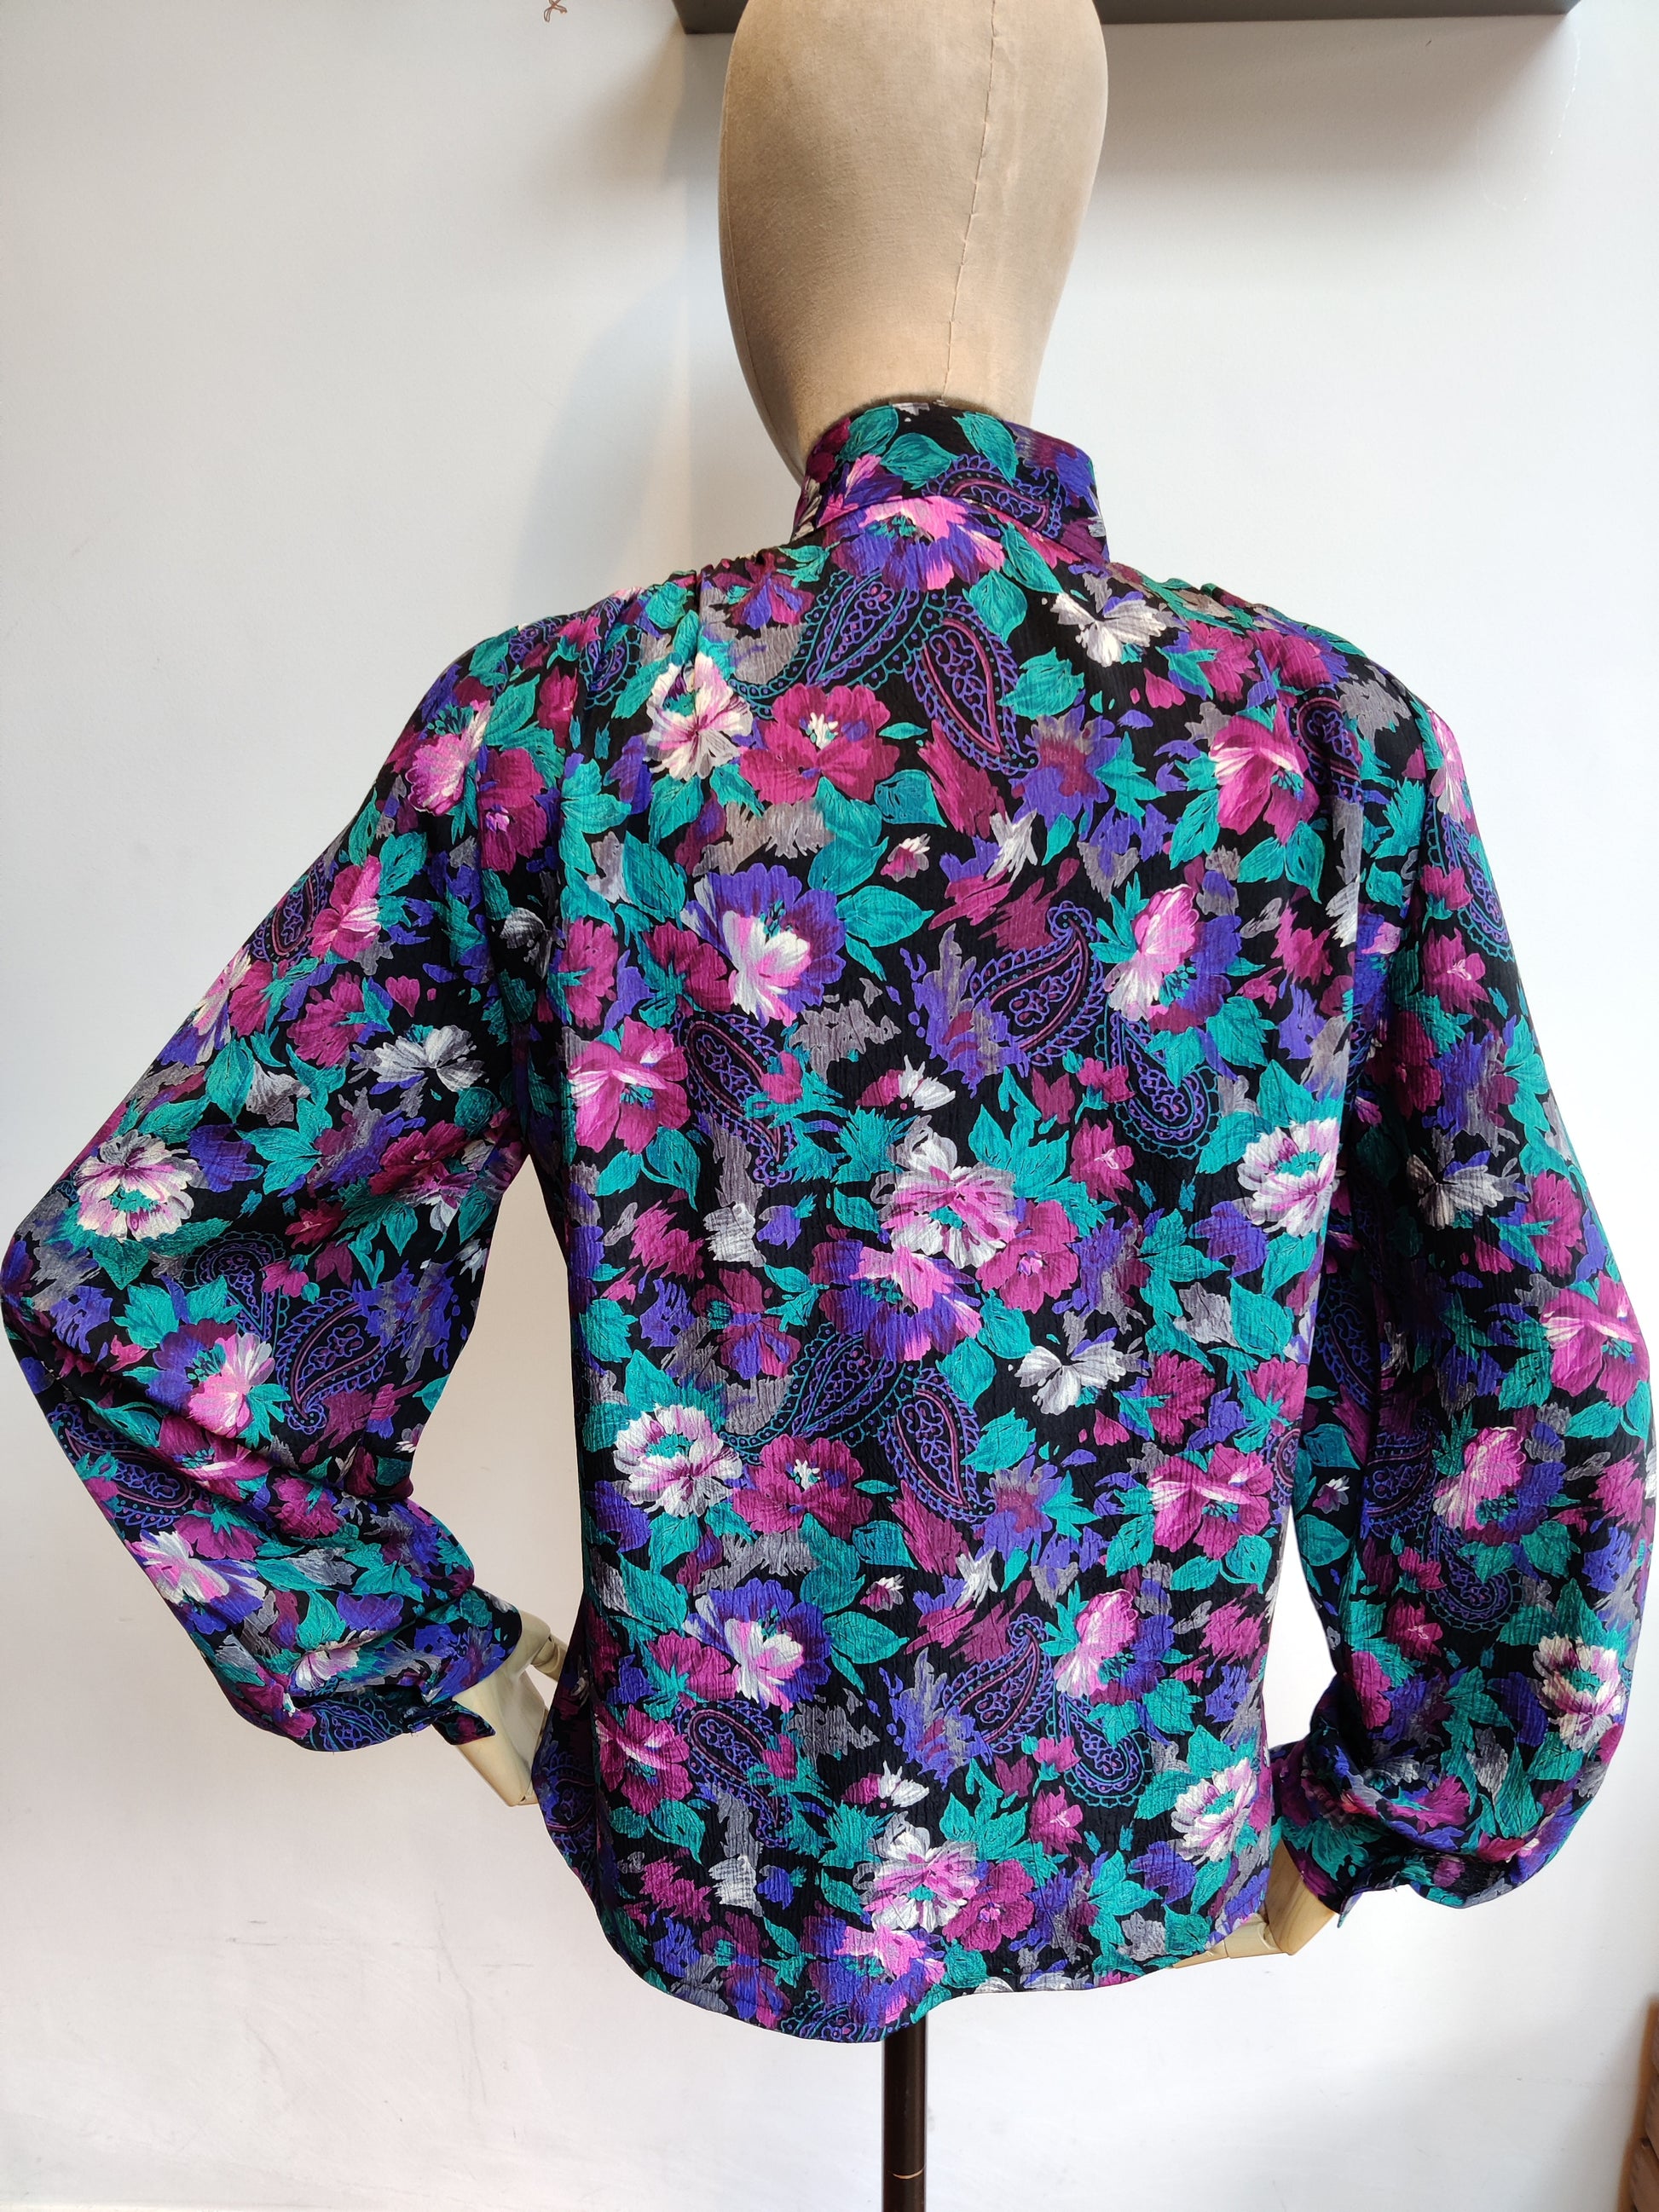 Vintage shirt with wide sleeves